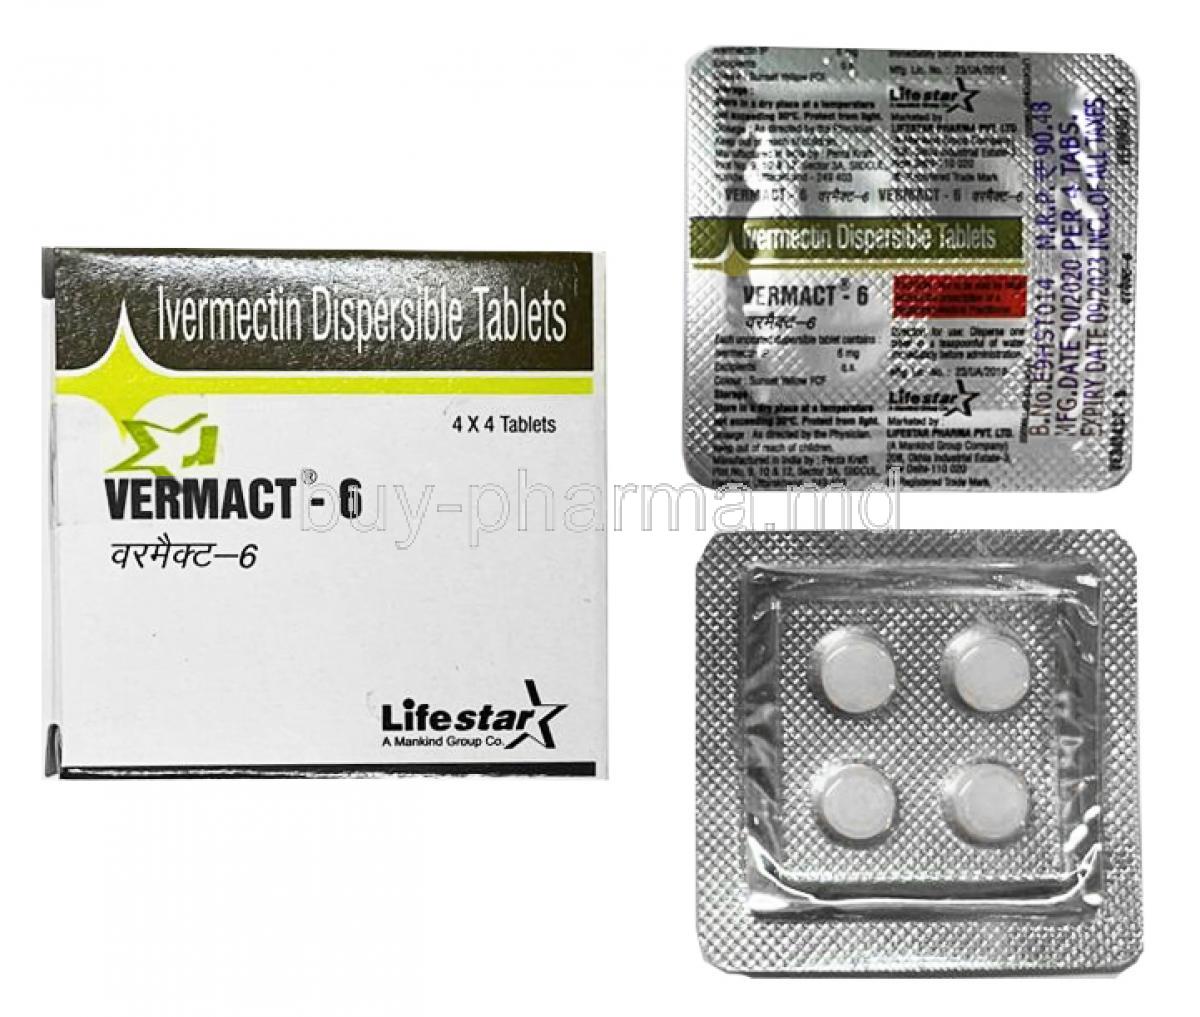 Vermact, Ivermectin 6mg box and tablets